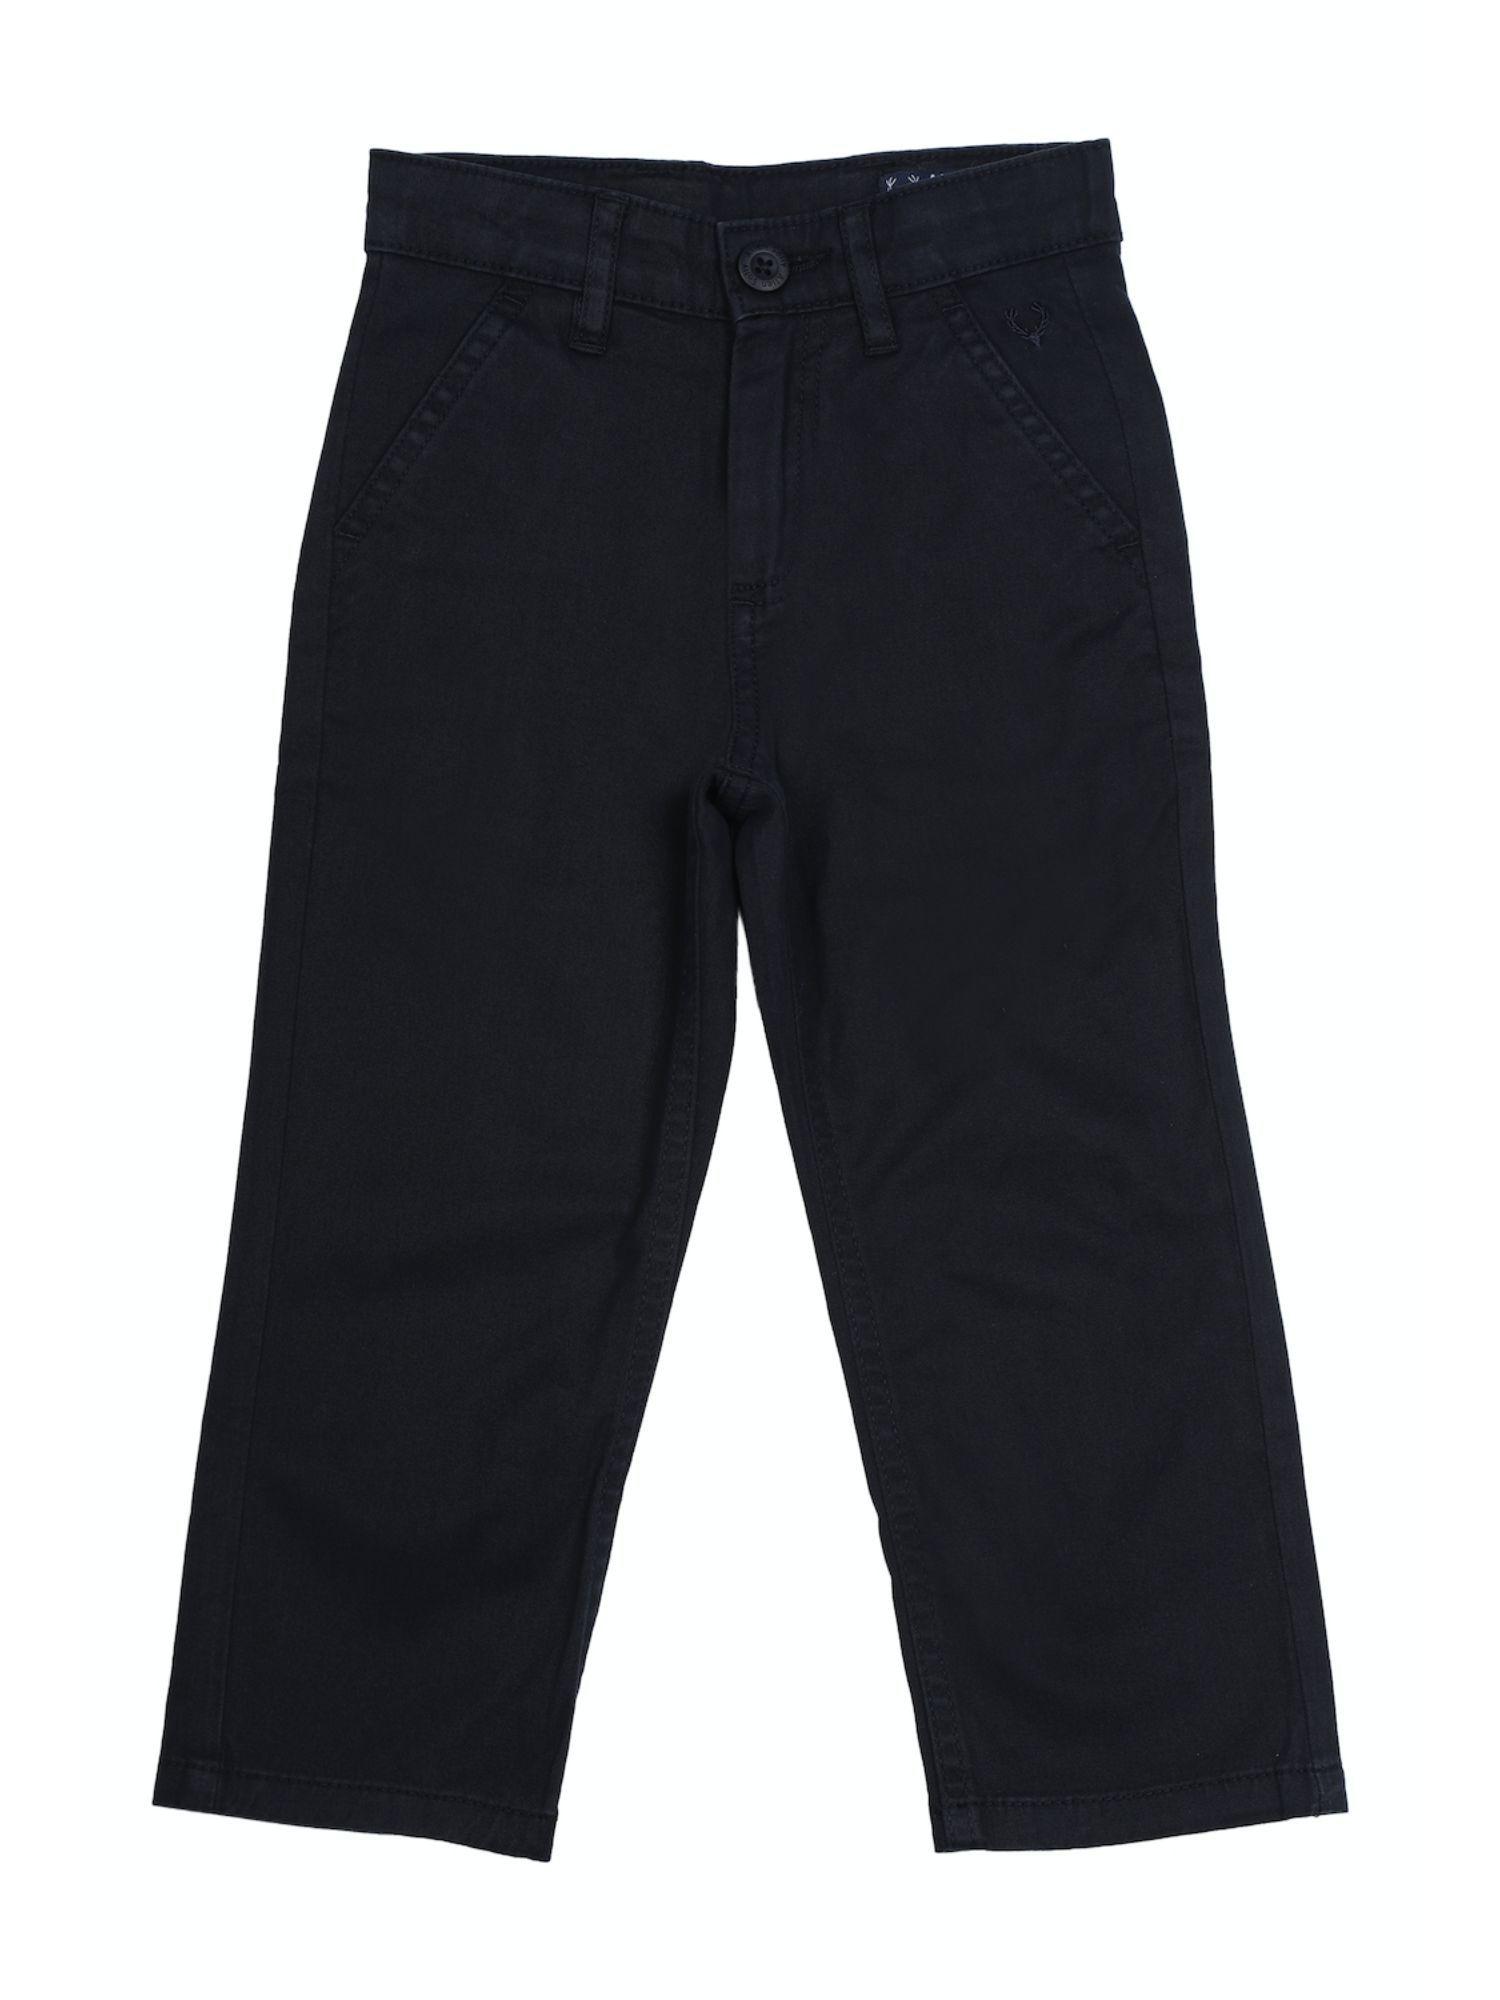 Boys Navy Slim Fit Solid Trousers